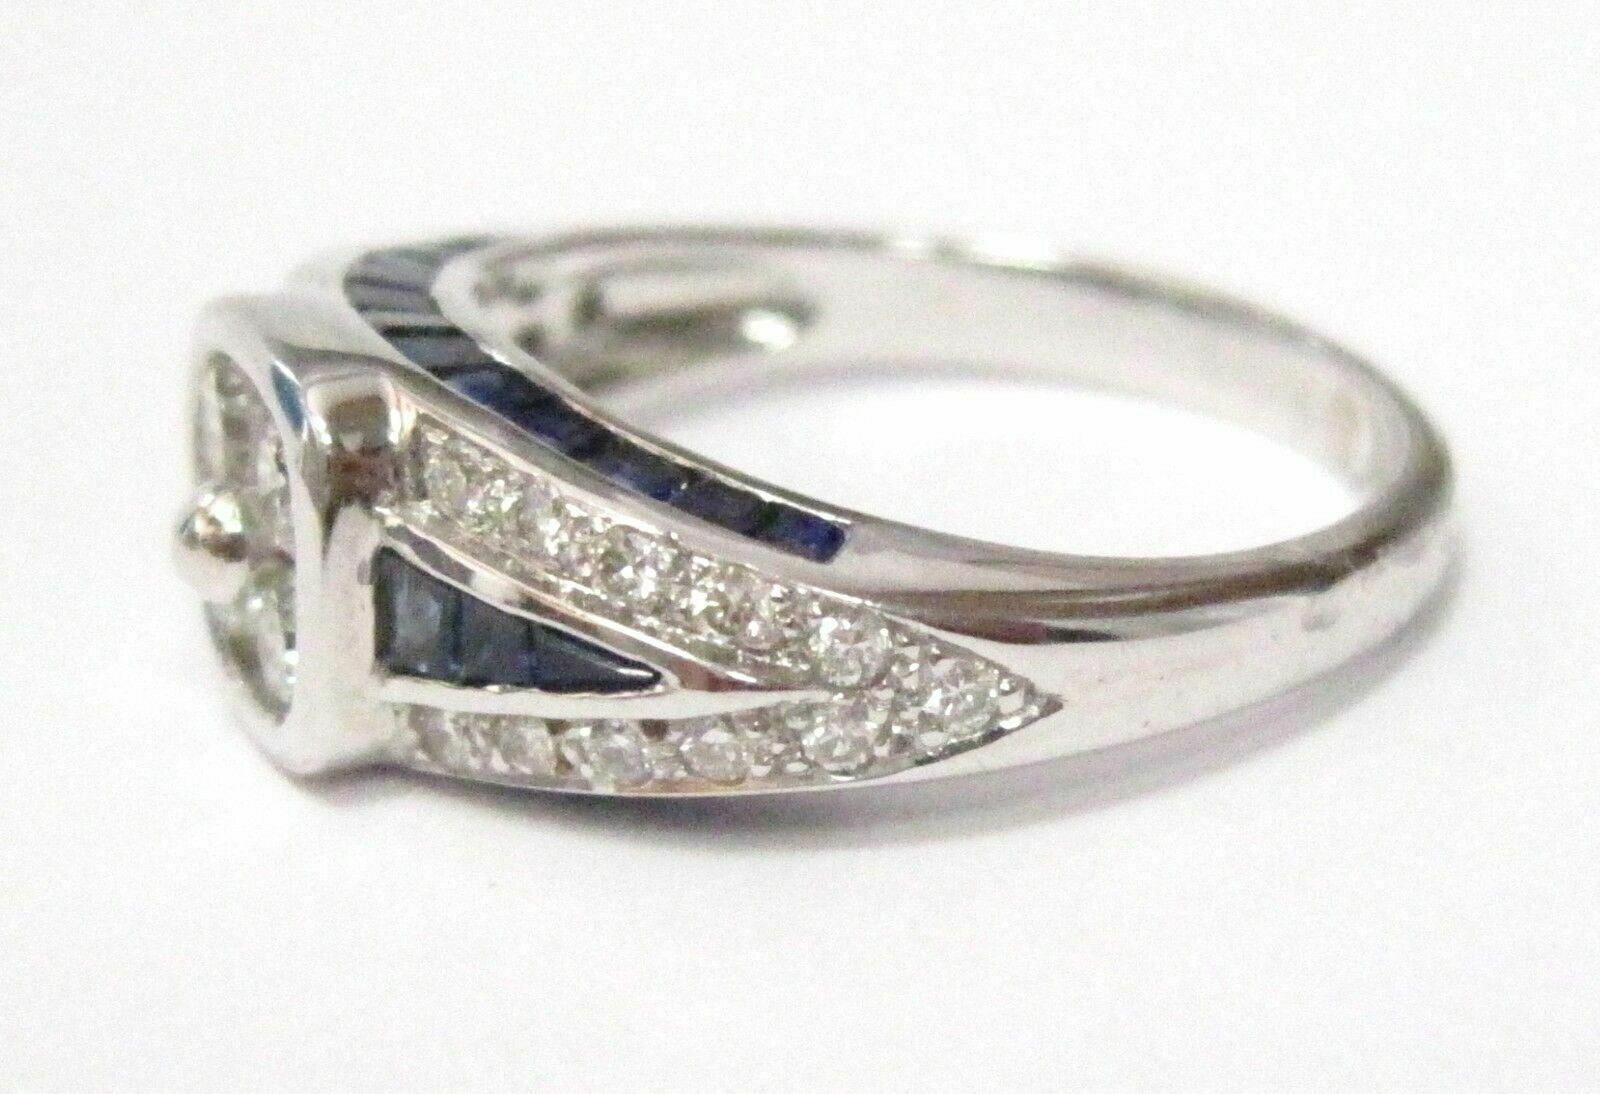 1.80 TCW Natural Blue Sapphire & Diamond Accents Ring Size 8 18kt White Gold